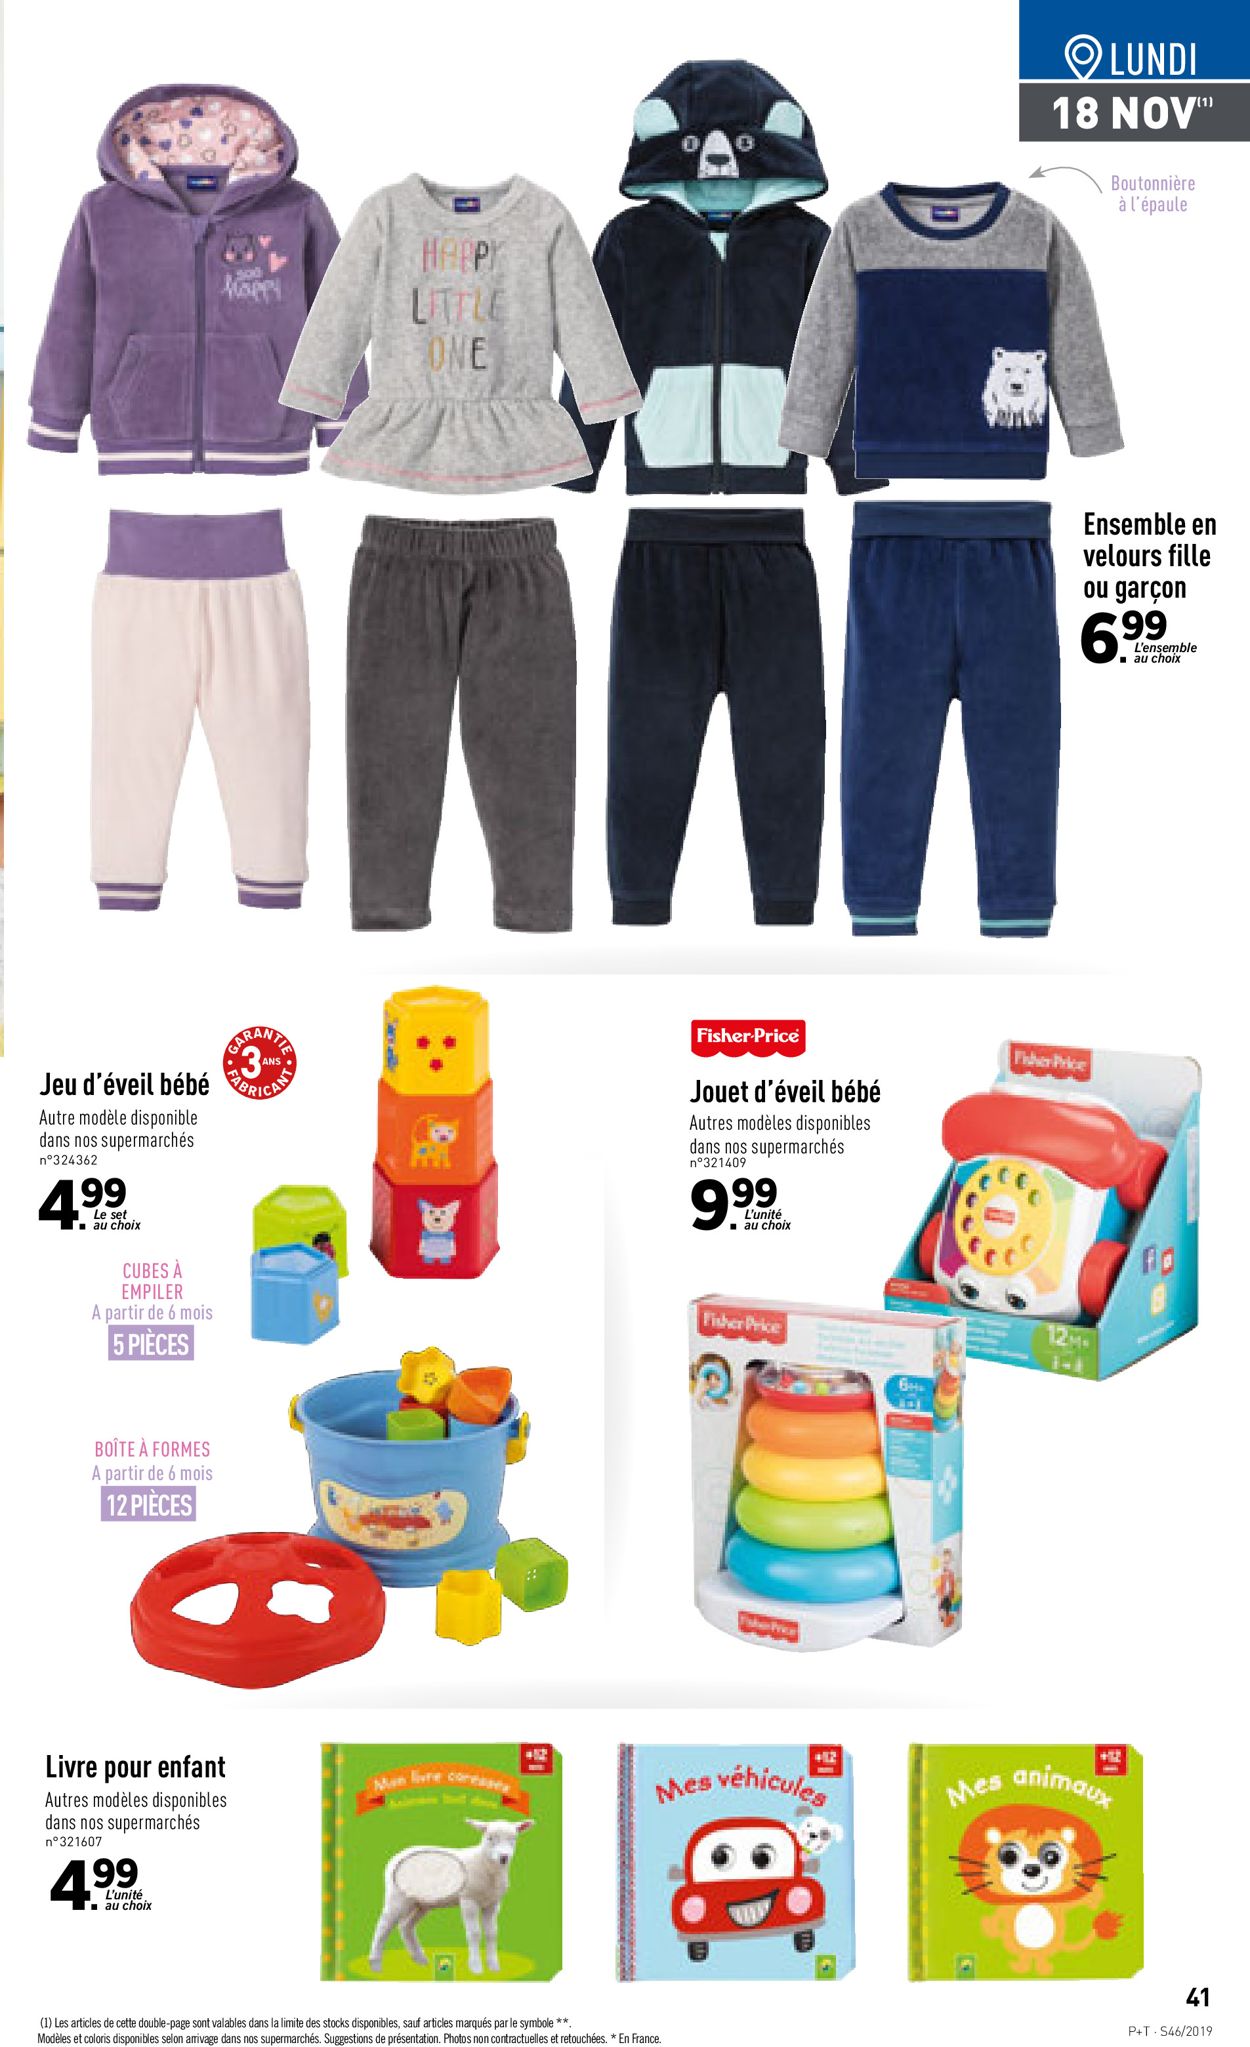 Lidl Catalogue - 13.11-19.11.2019 (Page 41)